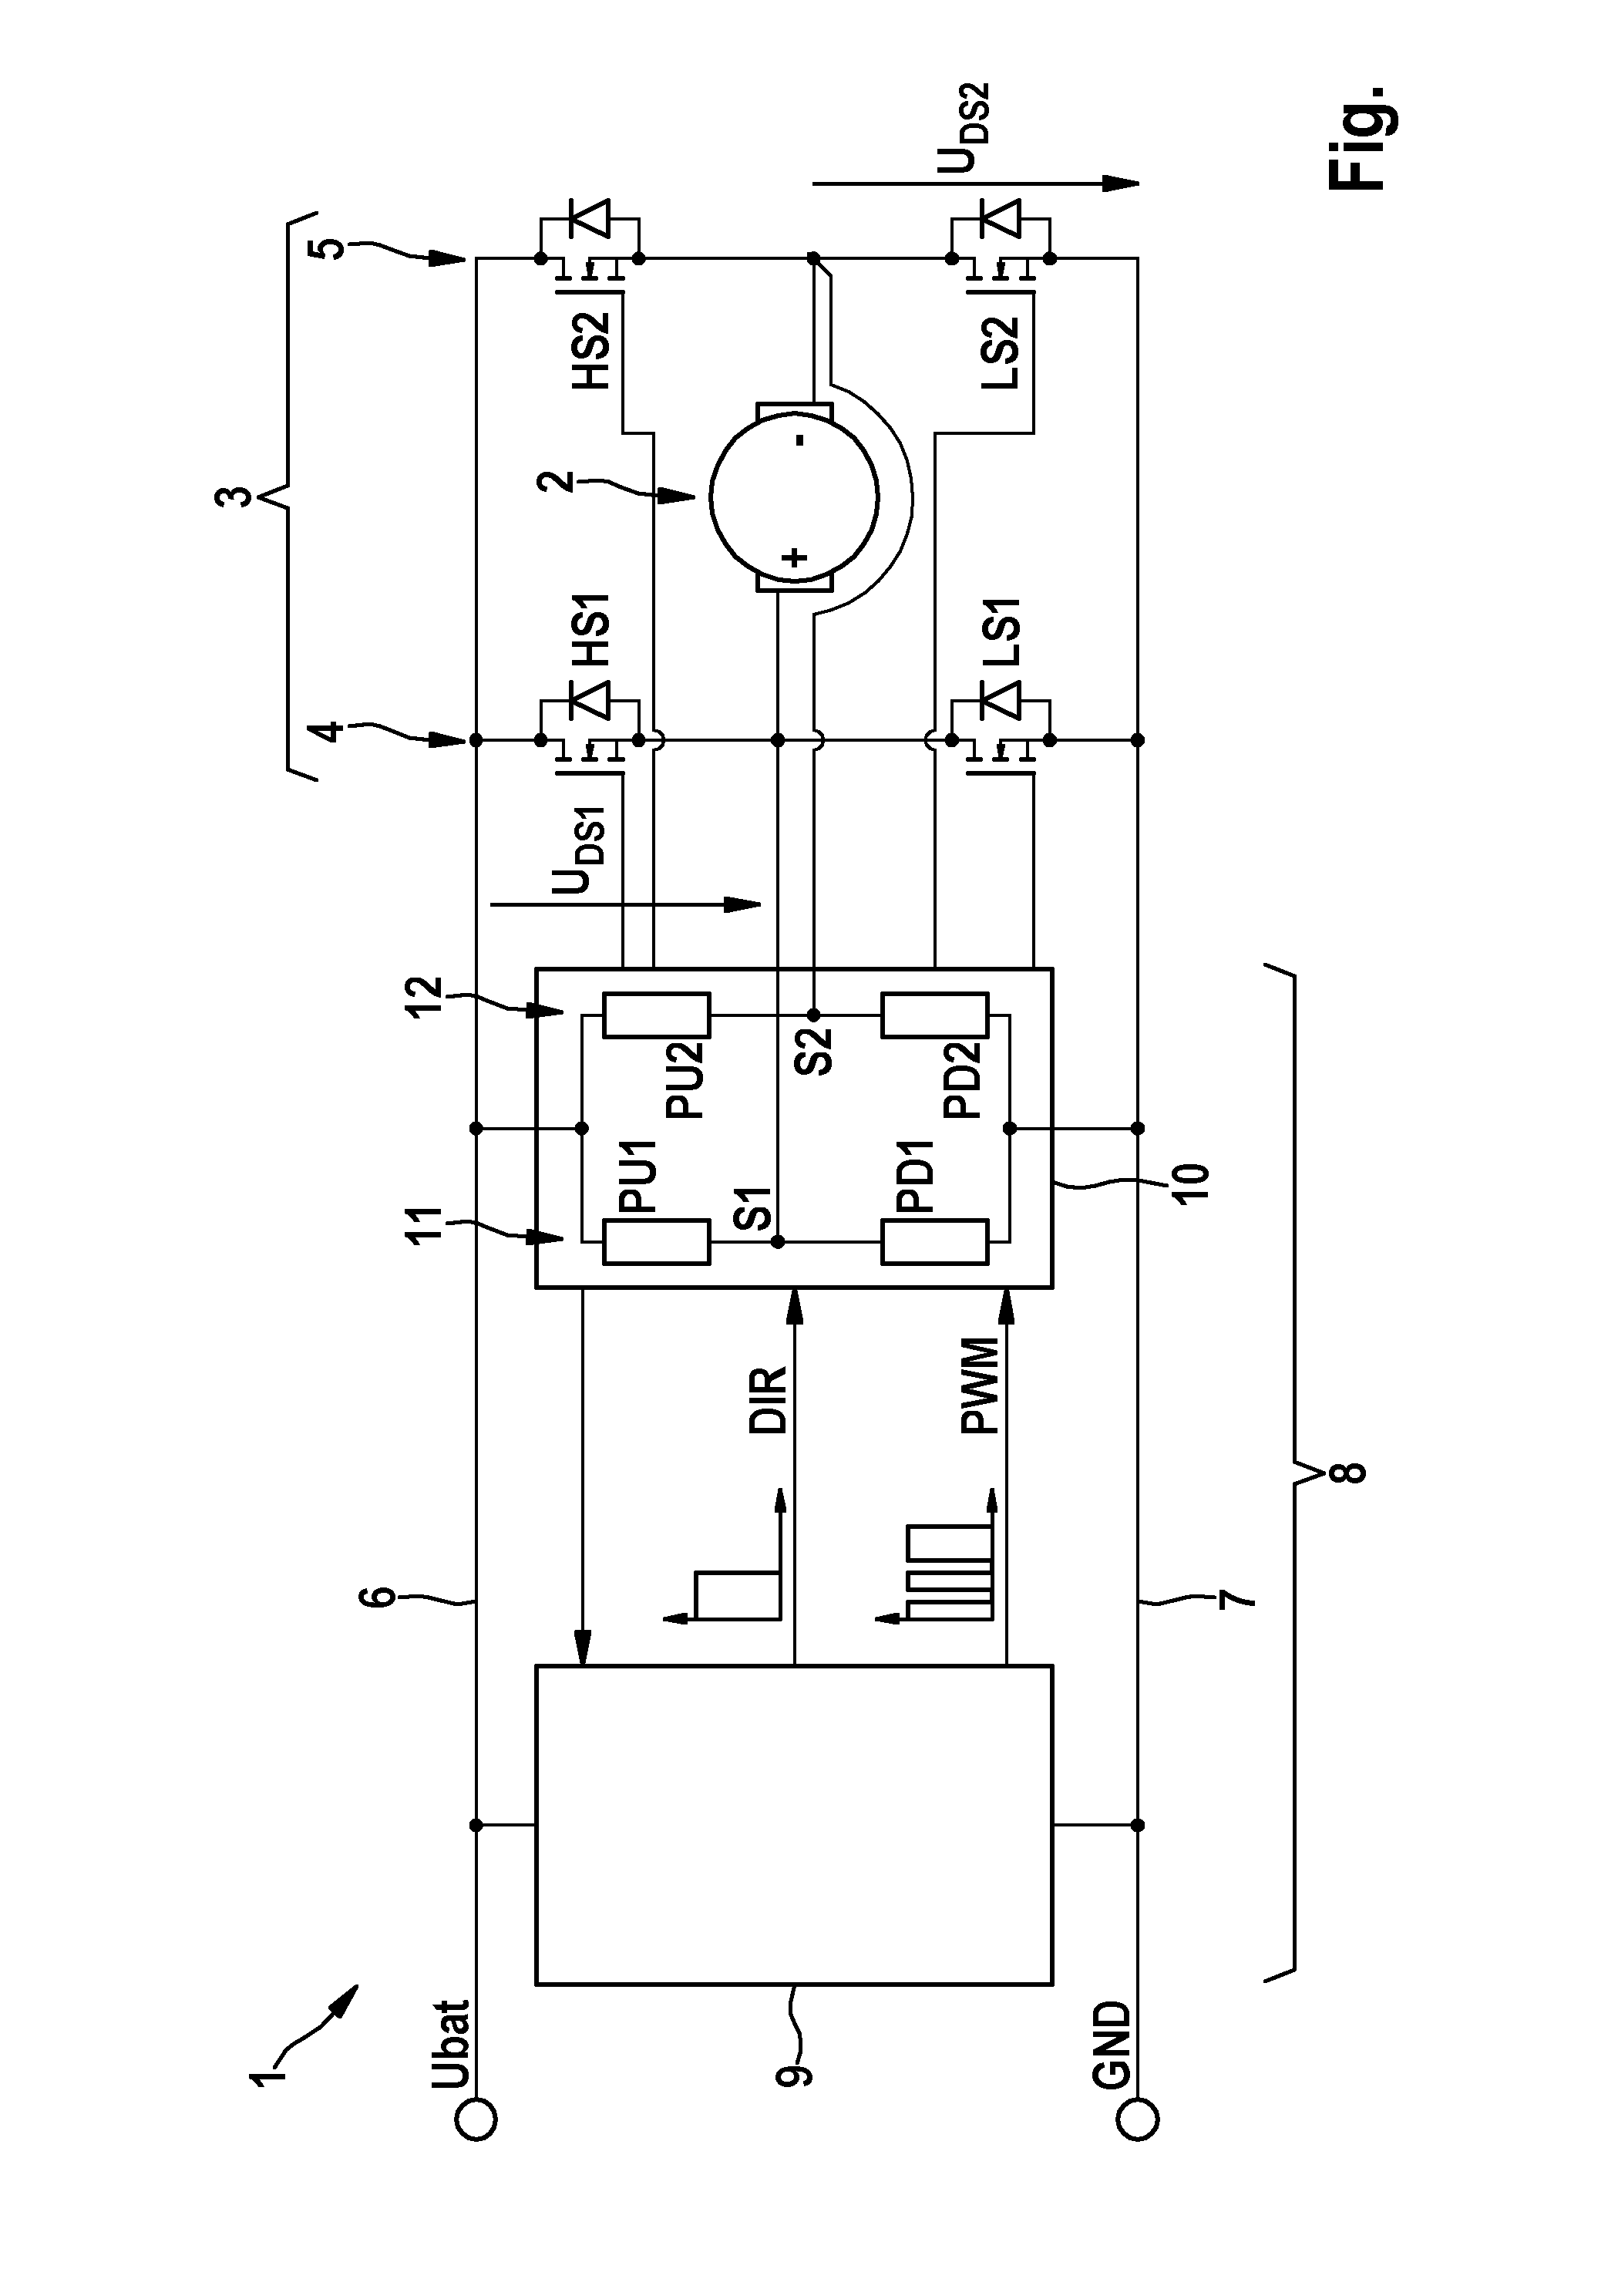 Power output stage, method for operation